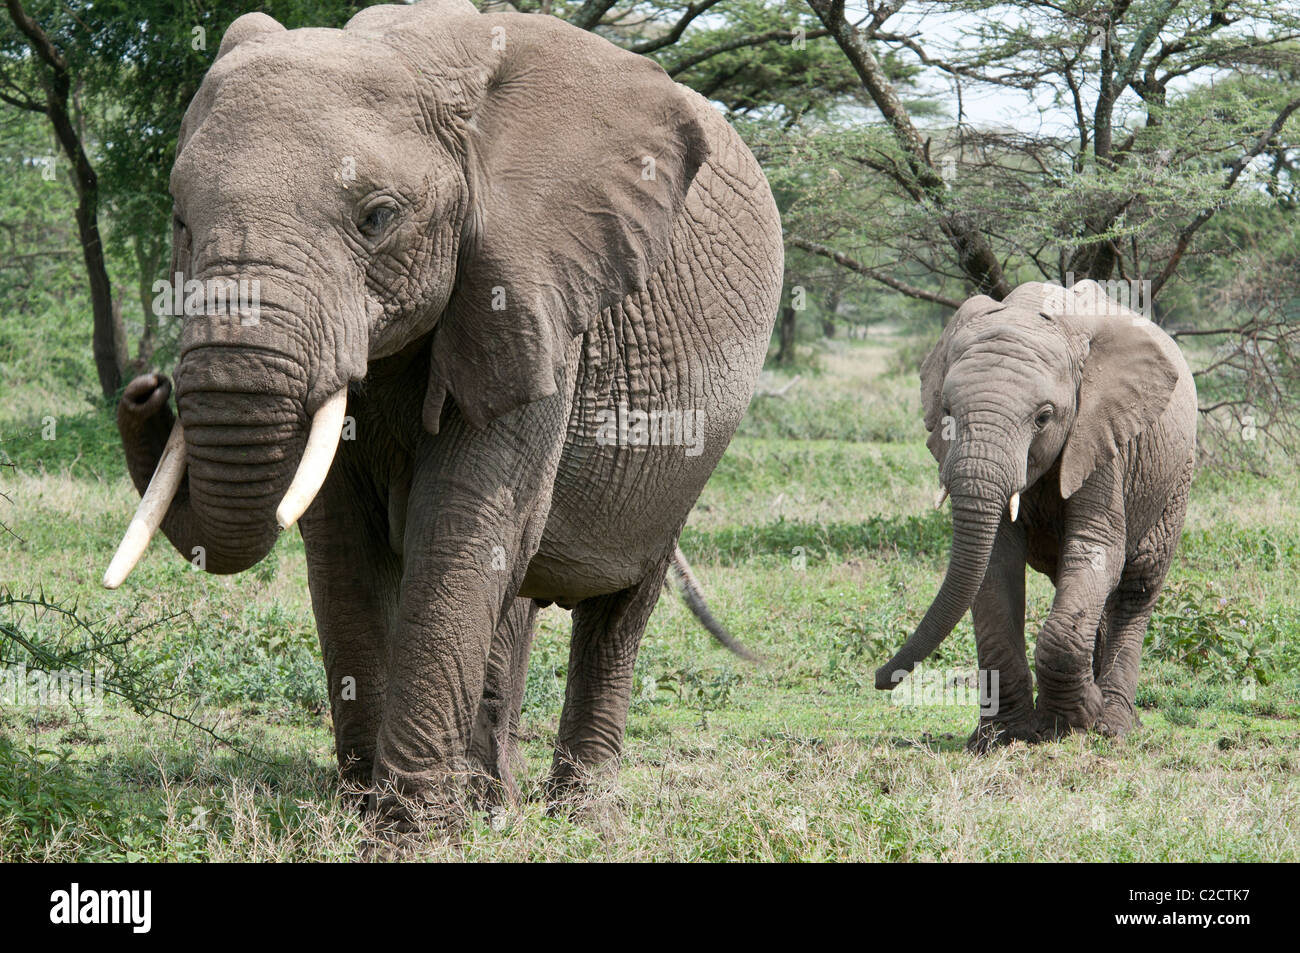 Stock photo of a baby elephant following his mom through the Ndutu woodlands. Stock Photo